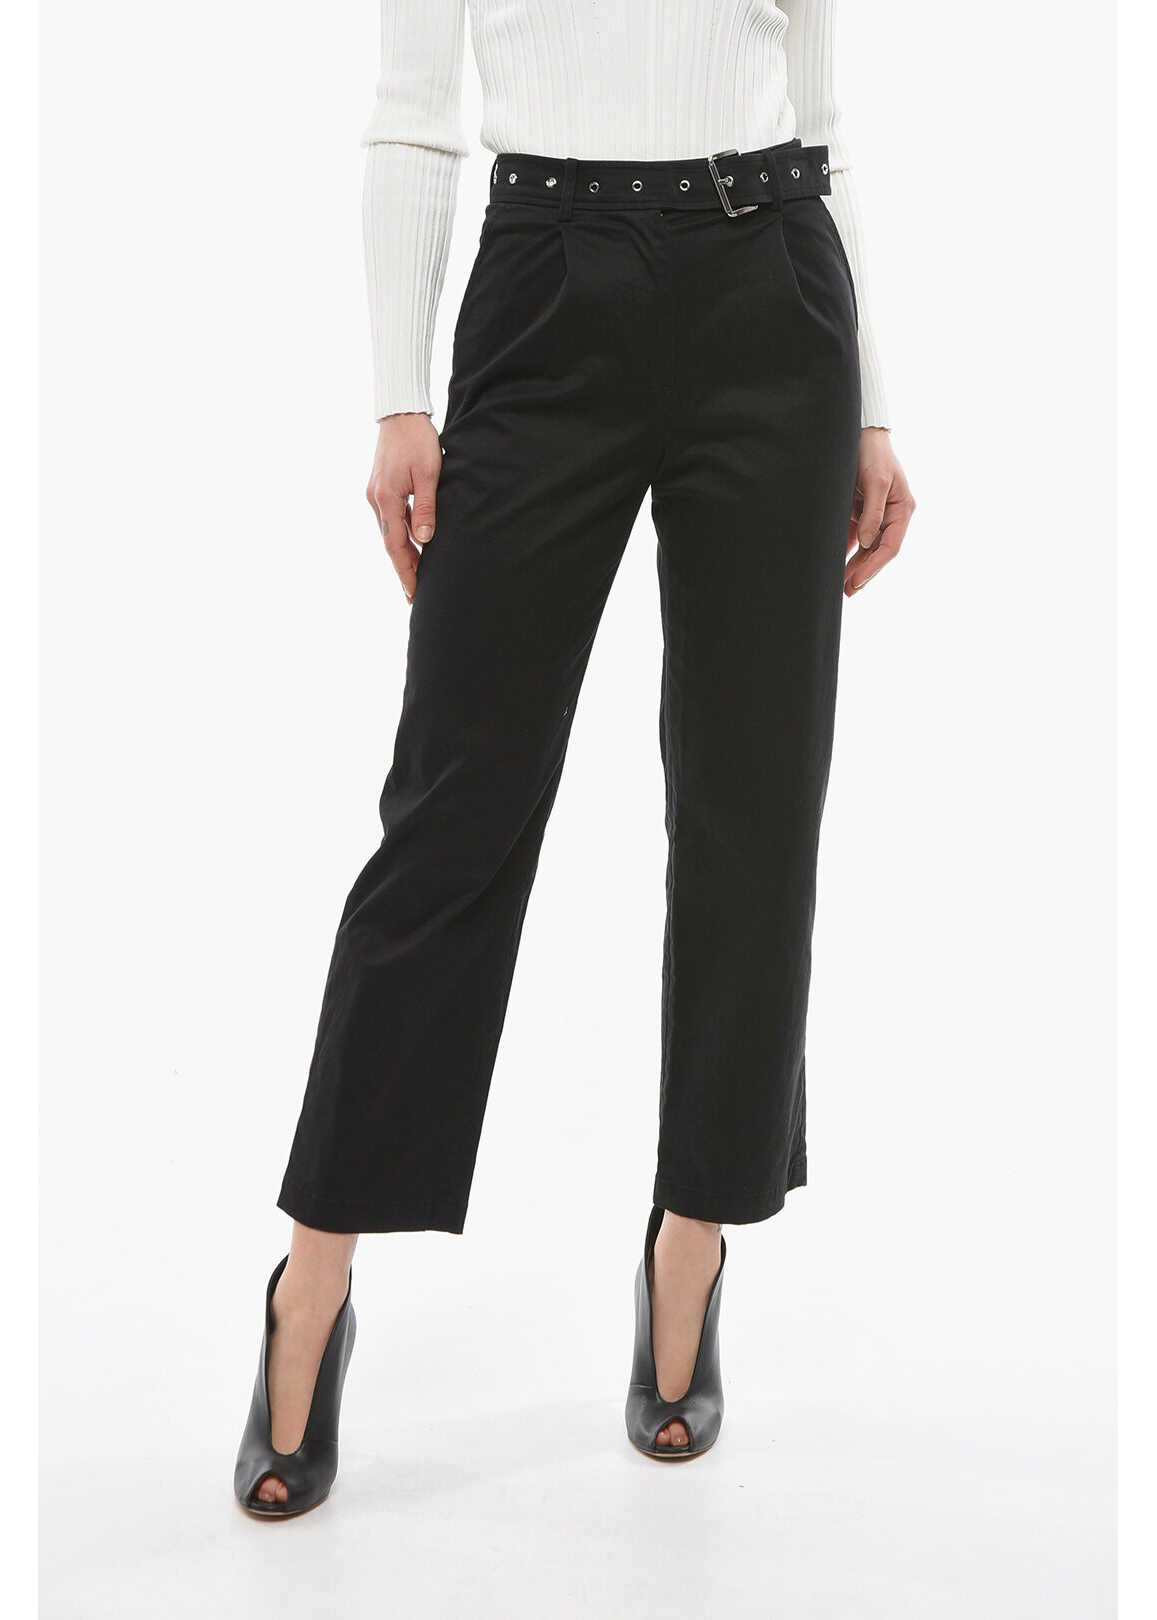 Michael Kors 4 Pocket Straight Fit Stretch Cotton Pants With Fabric Belt Black